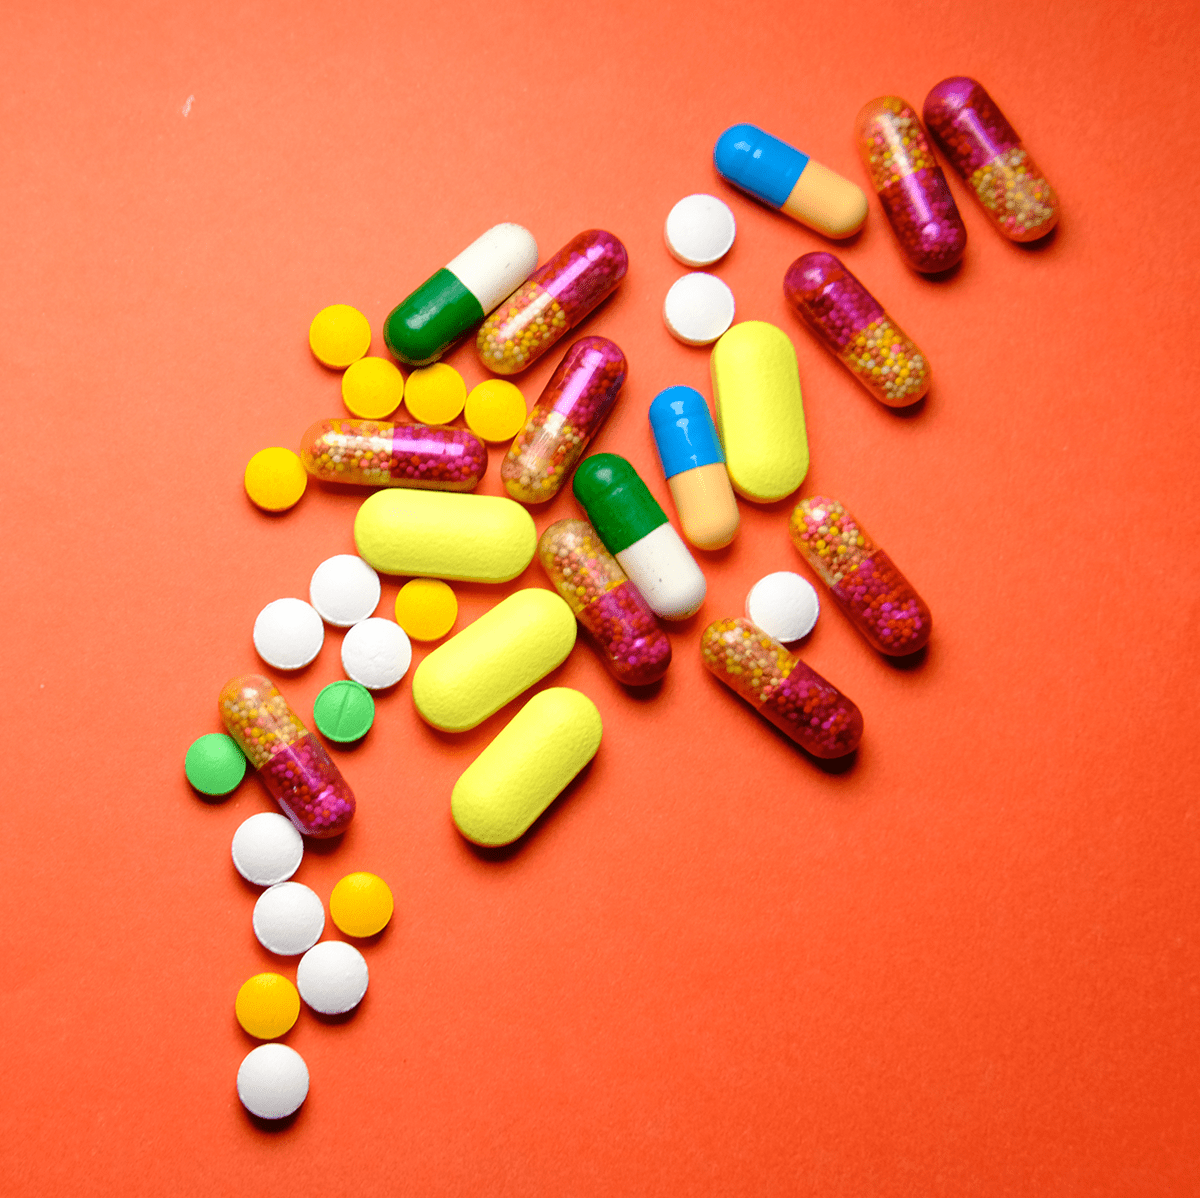 Do multivitamins even do anything? Two experts fight it out